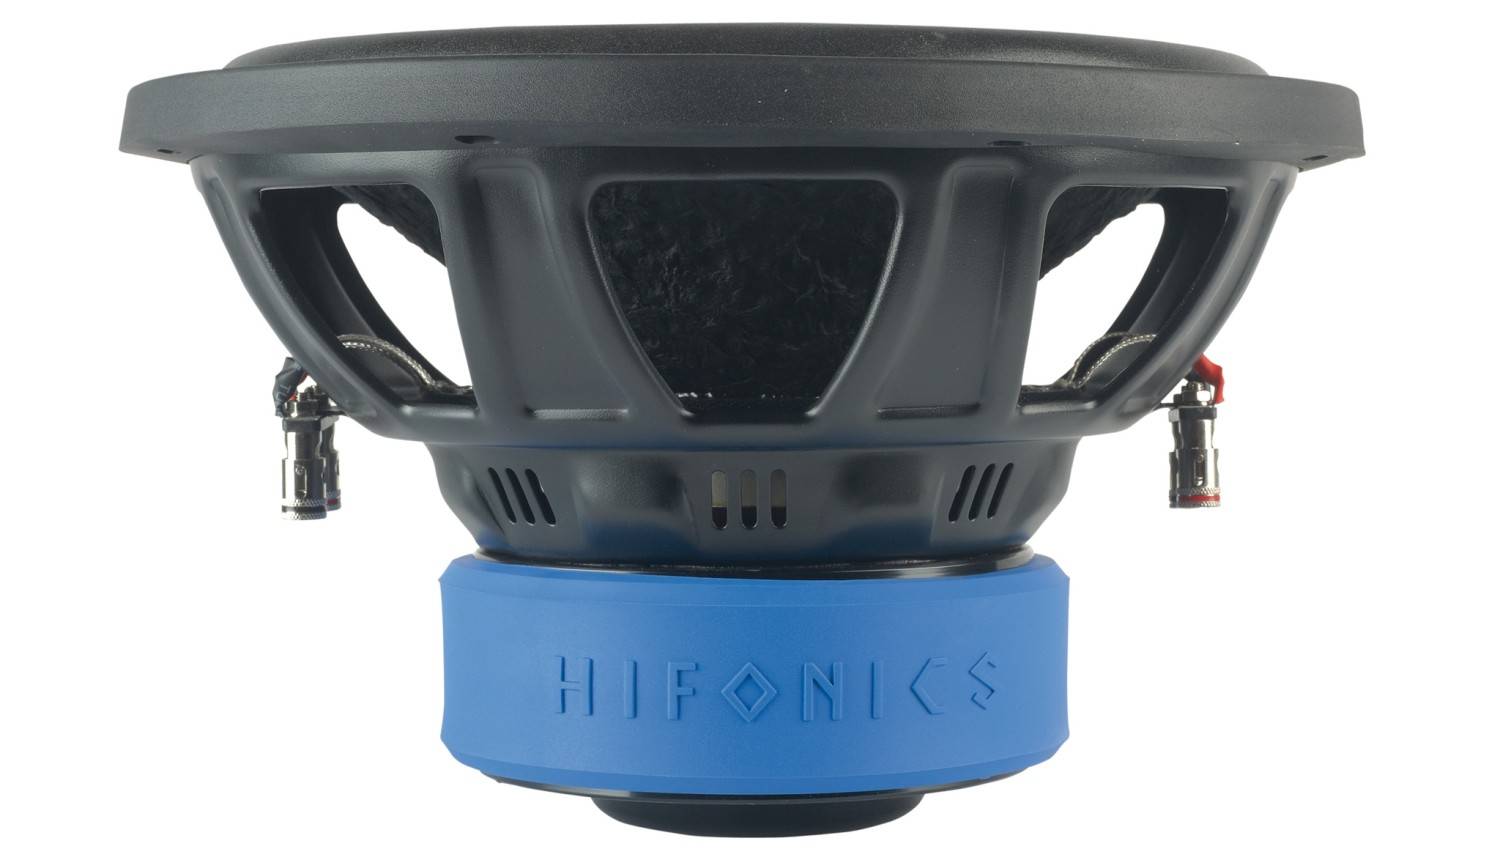 In-Car Subwoofer Chassis Hifonics ZXS8D2, Hifonics ZXS10D2, Hifonics ZXS12D2 im Test , Bild 2